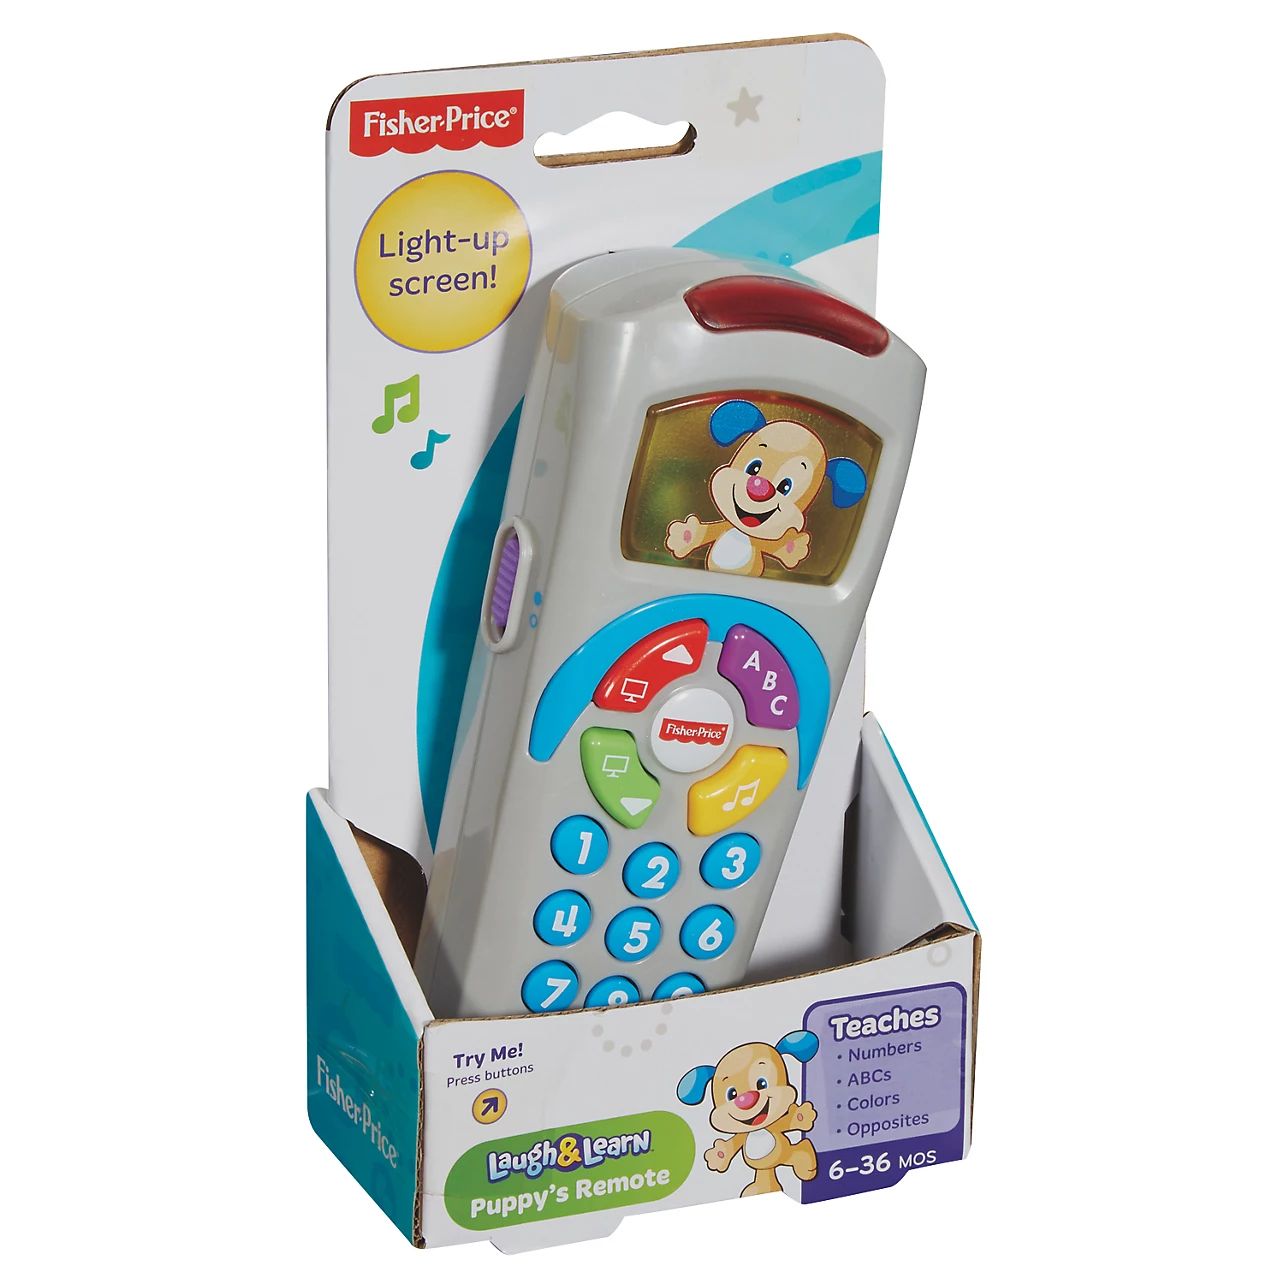 Fisher-Price Laugh & Learn Puppy Remote | Kohl's